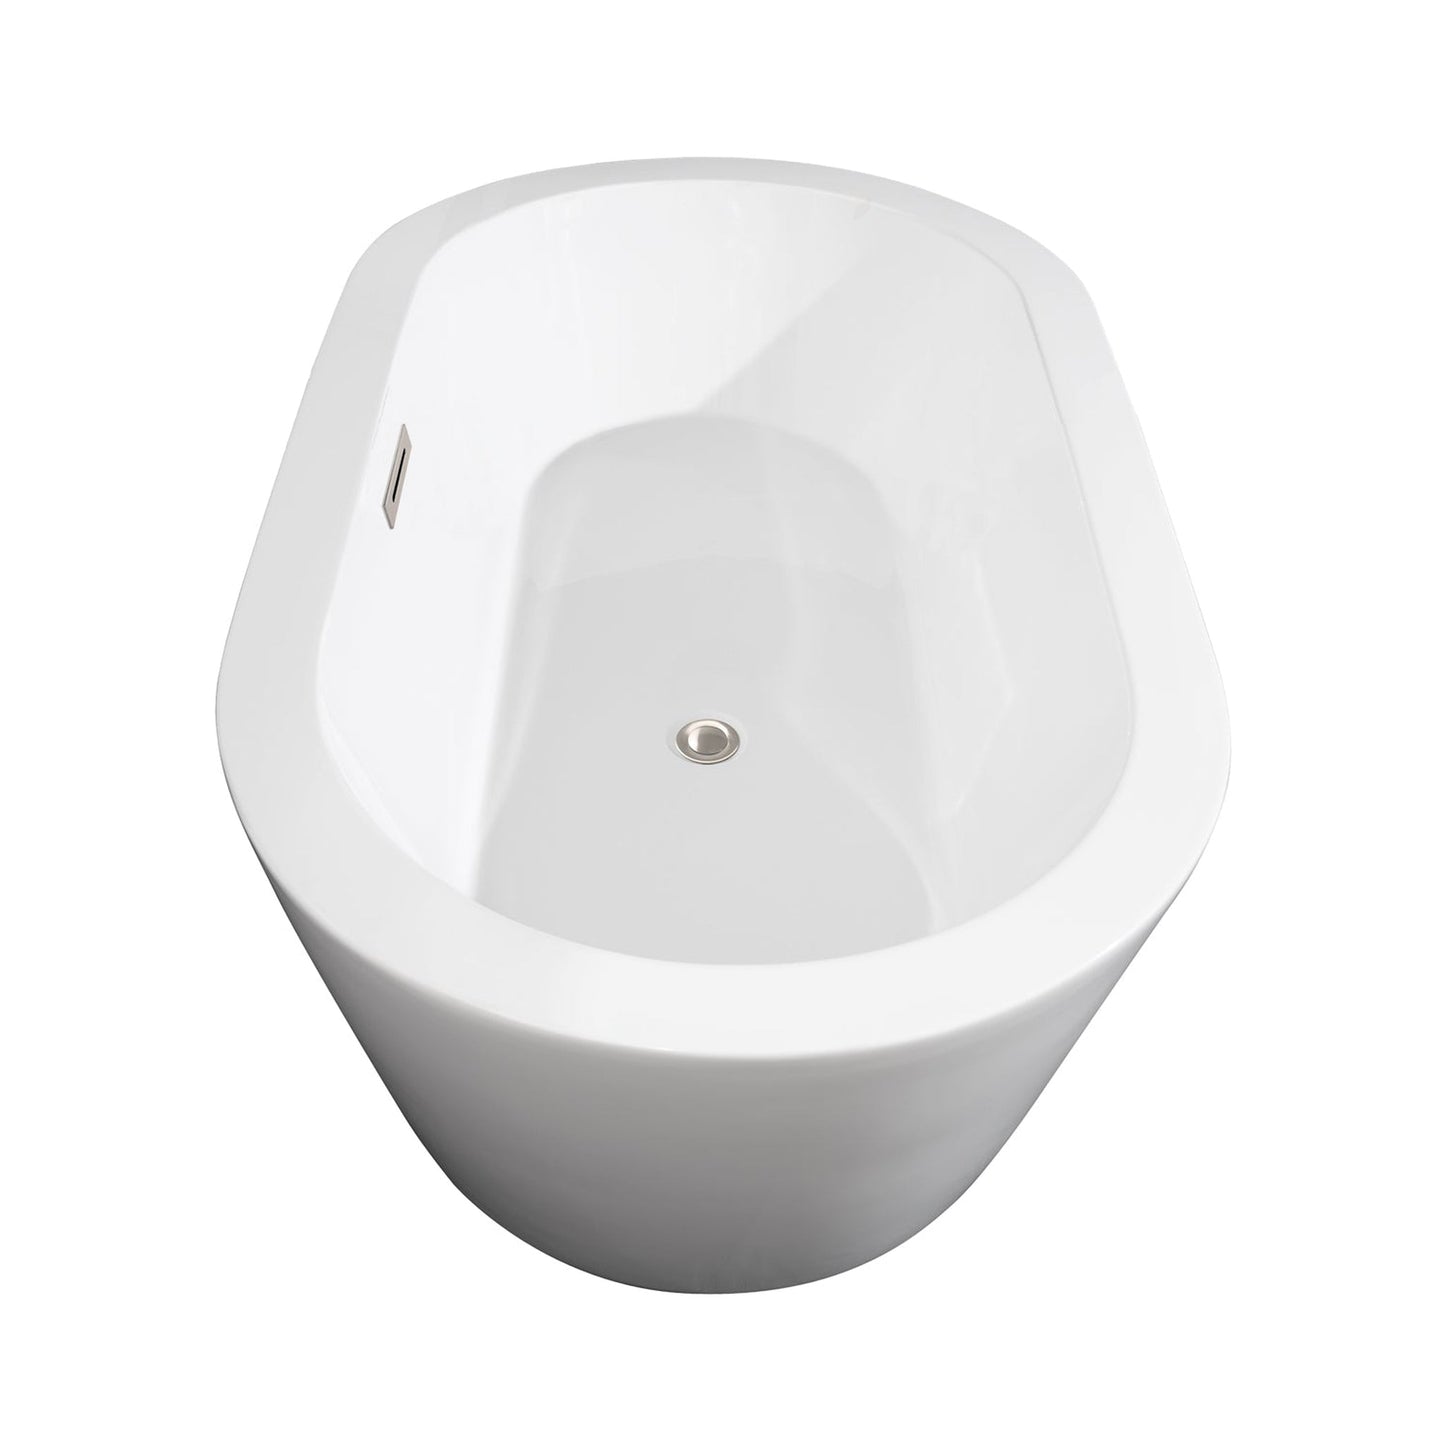 Wyndham Collection Mermaid 60" Freestanding Bathtub in White With Floor Mounted Faucet, Drain and Overflow Trim in Brushed Nickel